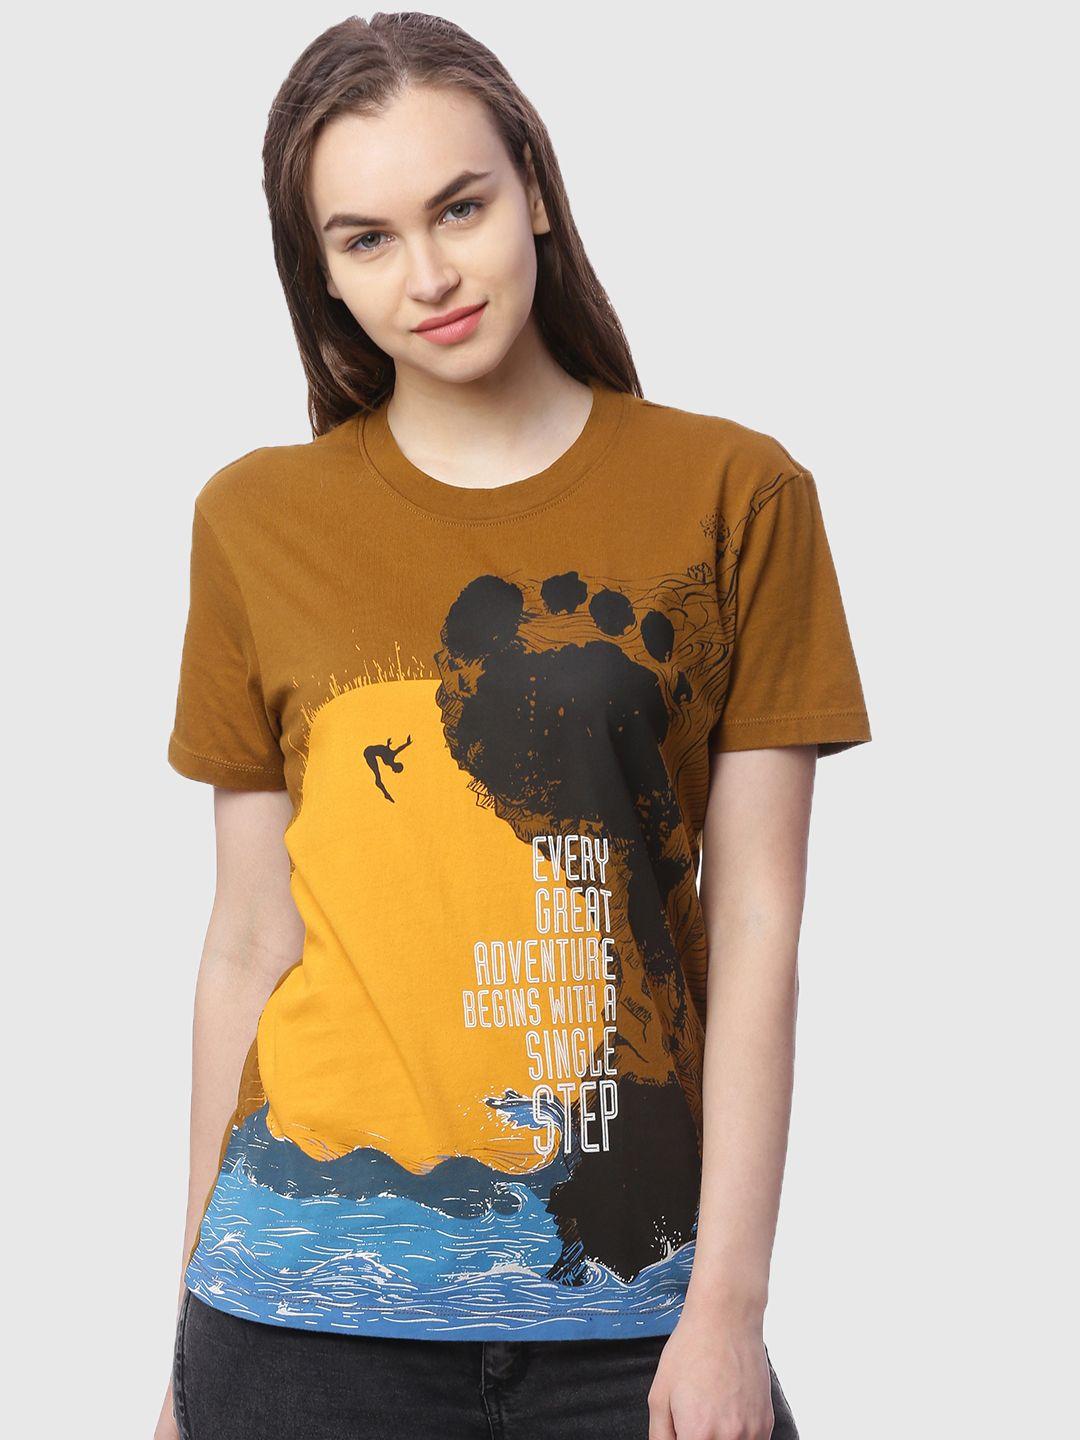 wolfpack women brown & yellow graphic printed cotton t-shirt